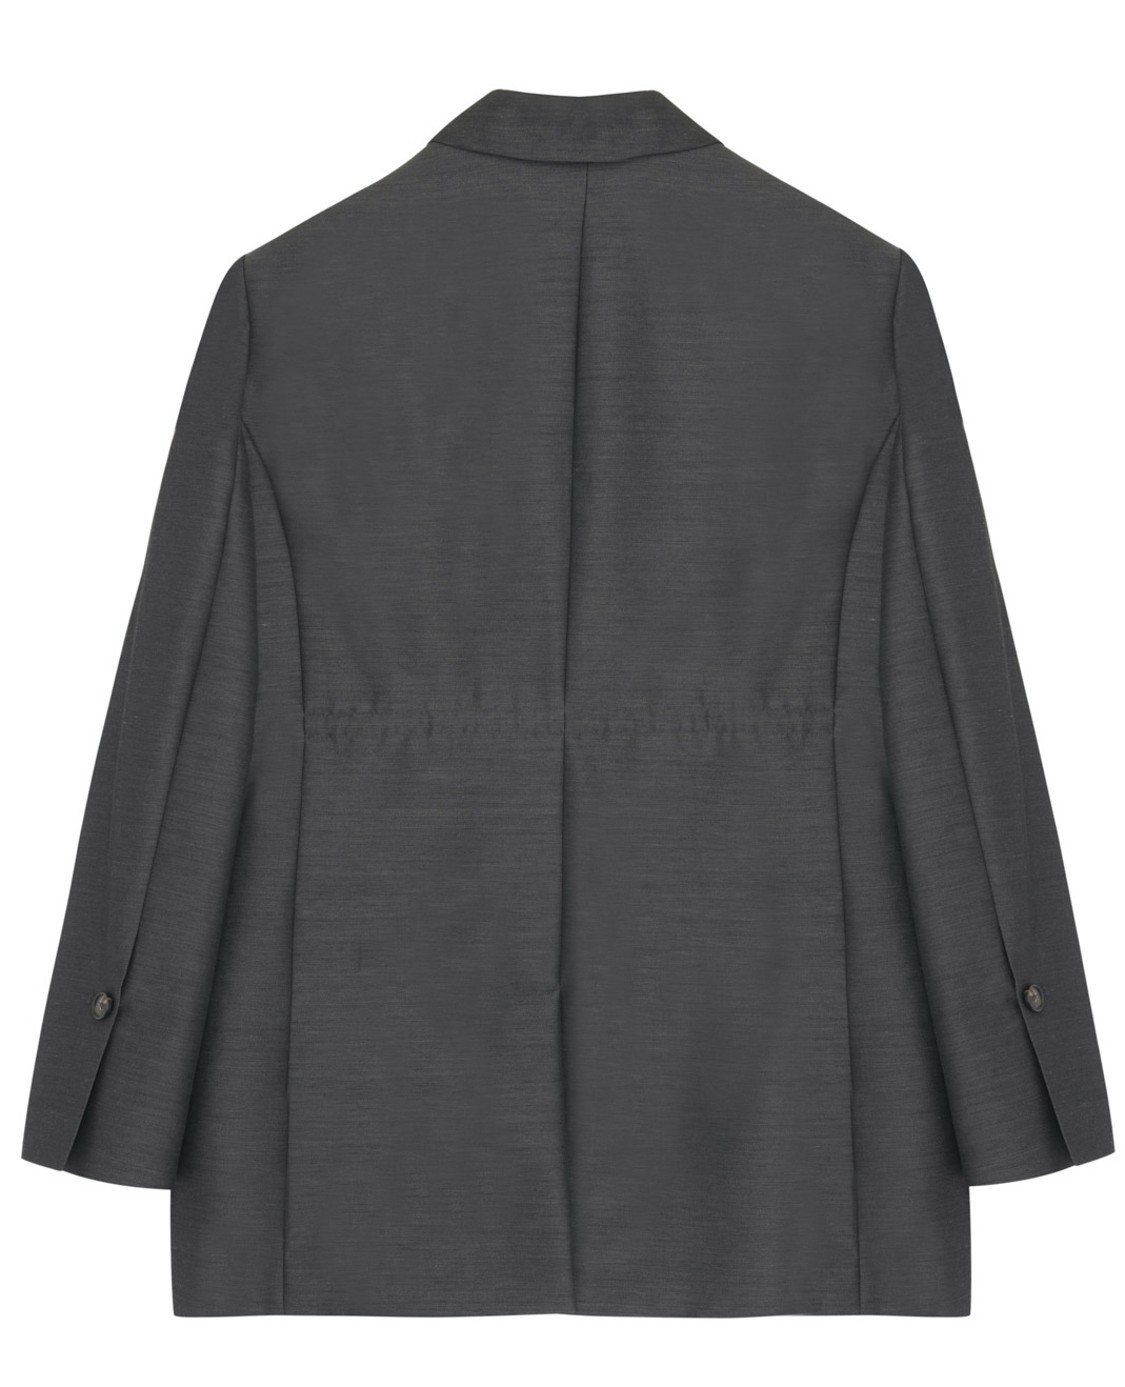 shop Tela  Jackets: Jackets Tela, Lucente model, oversize, long sleeves, two buttons on front, lateral pockets.

Composition: 50% virgin wool, 50% viscose.
Lining: 100% cotton. number 2550